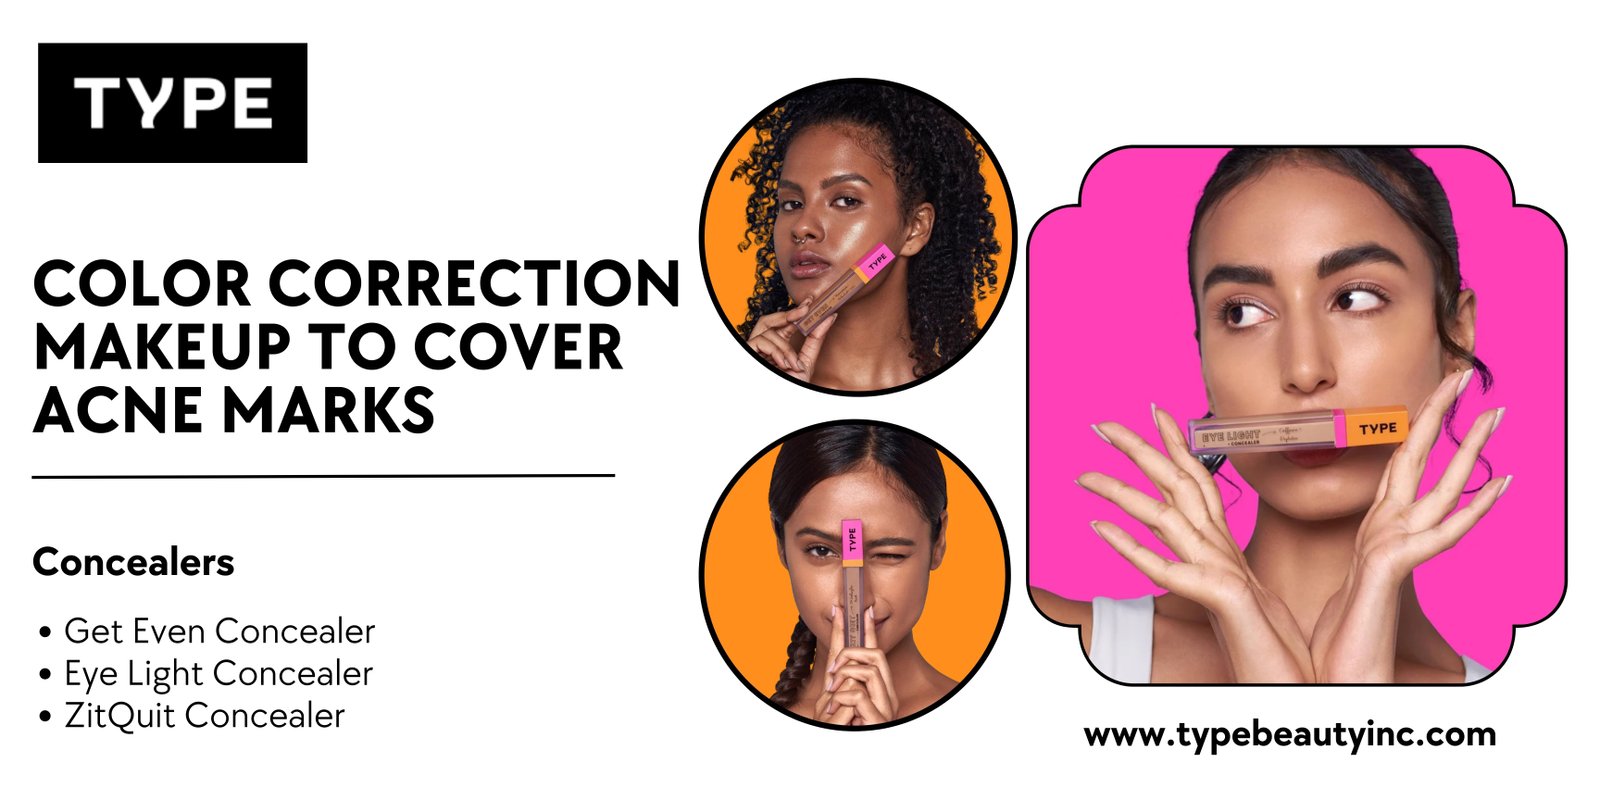 Color Correction Makeup to Cover Acne Marks